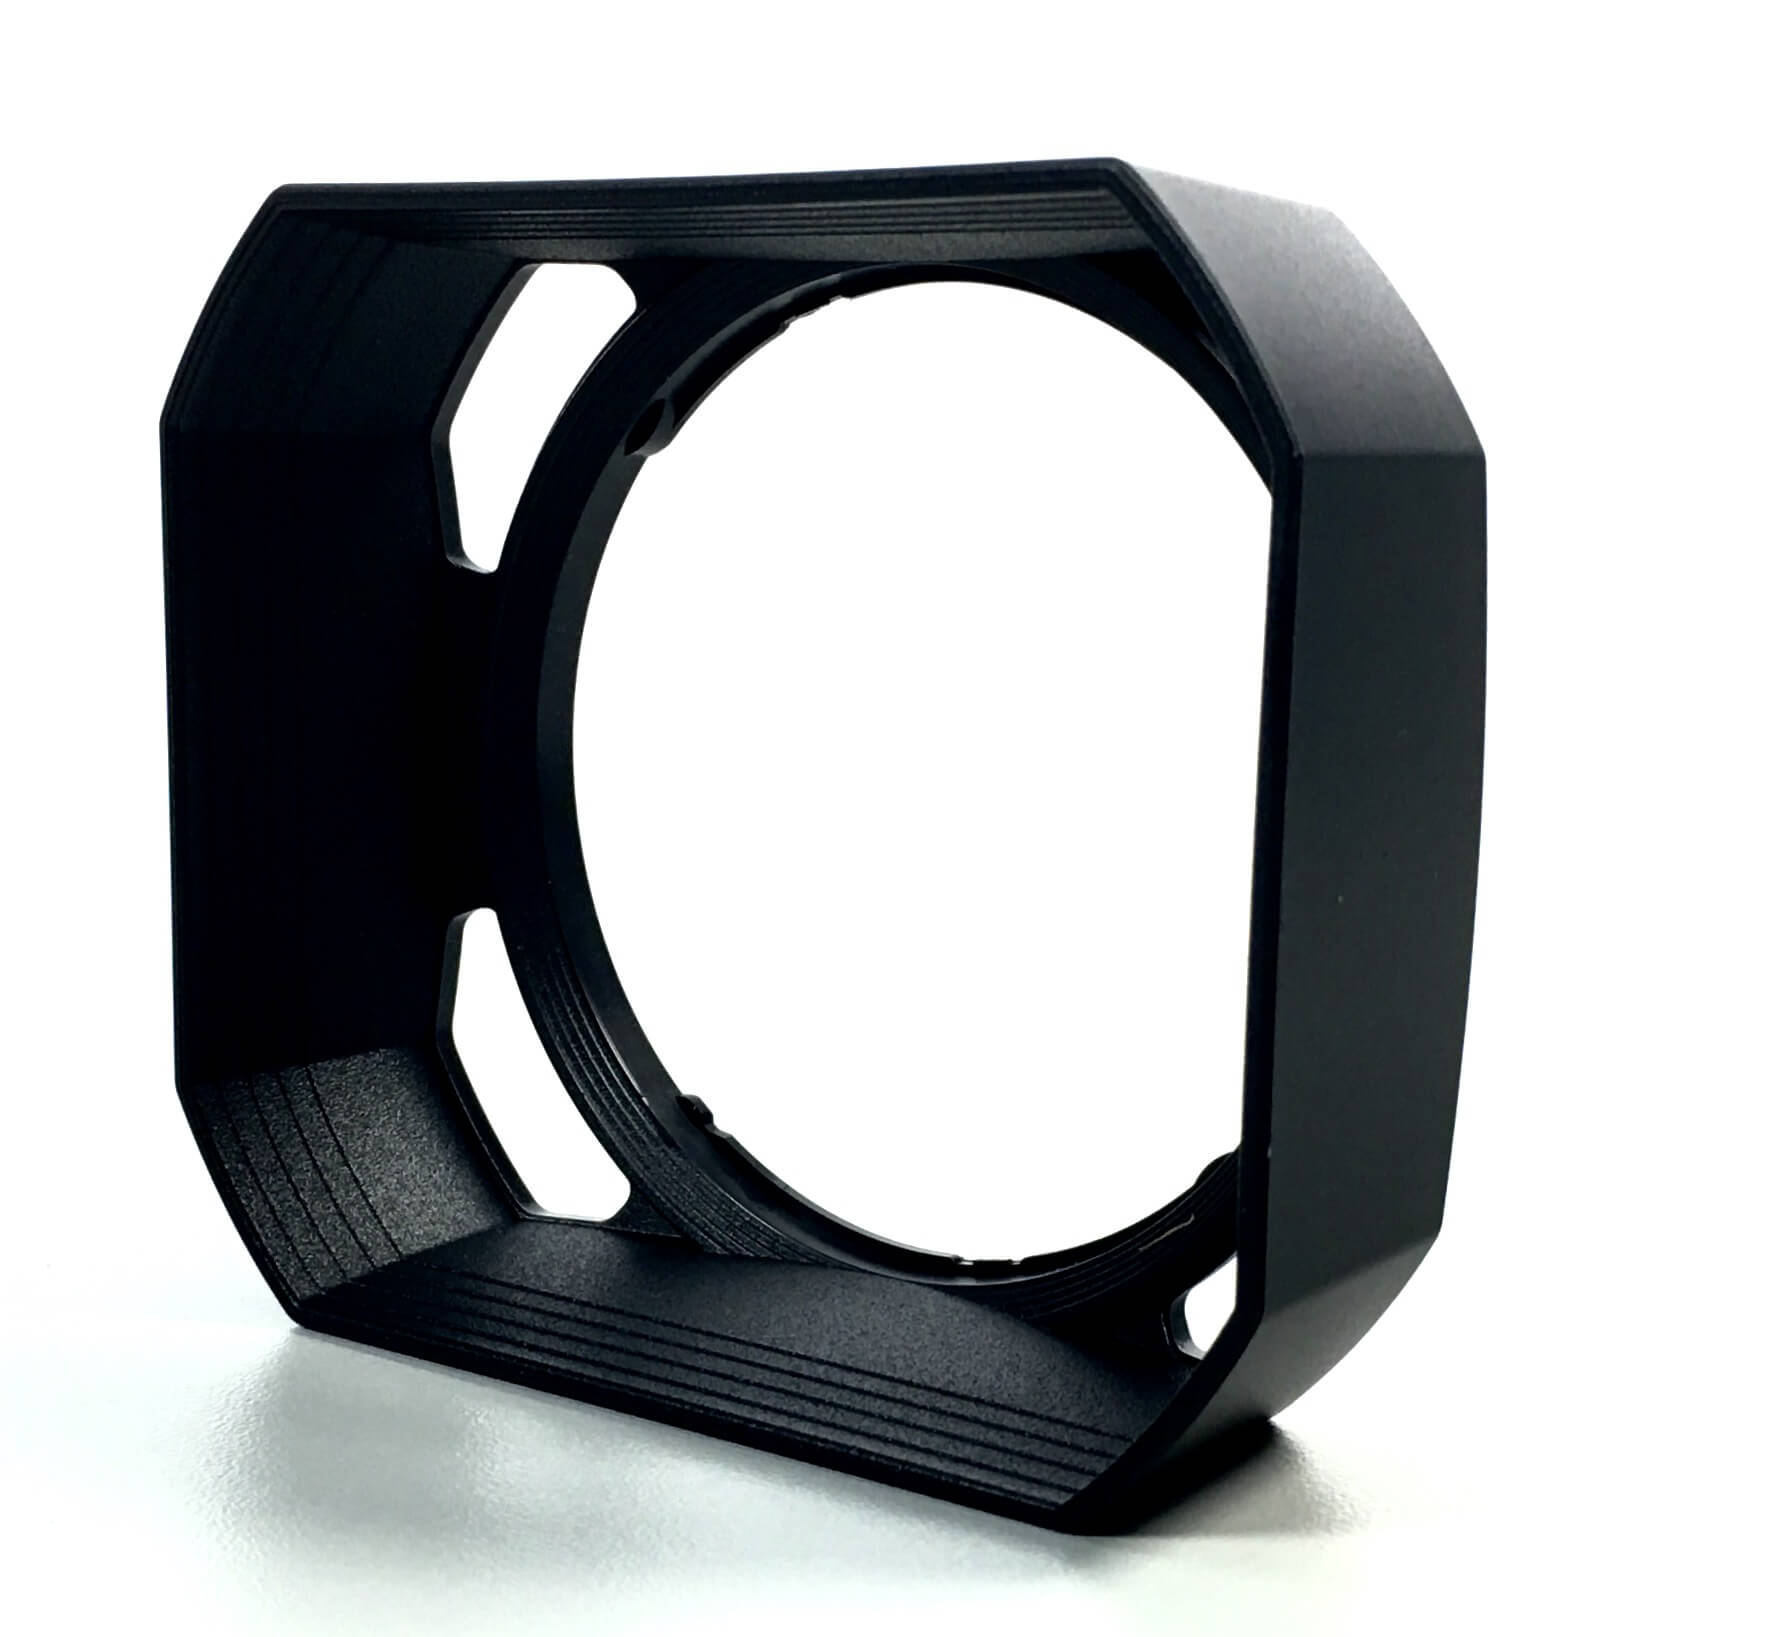 Original Lens Hood Rectangle Square that fits on the Sony HDR-CX900 camcorder. It is a genuine Sony part, sourced directly from Sony USA. Brand new factory fresh. Free Shipping.